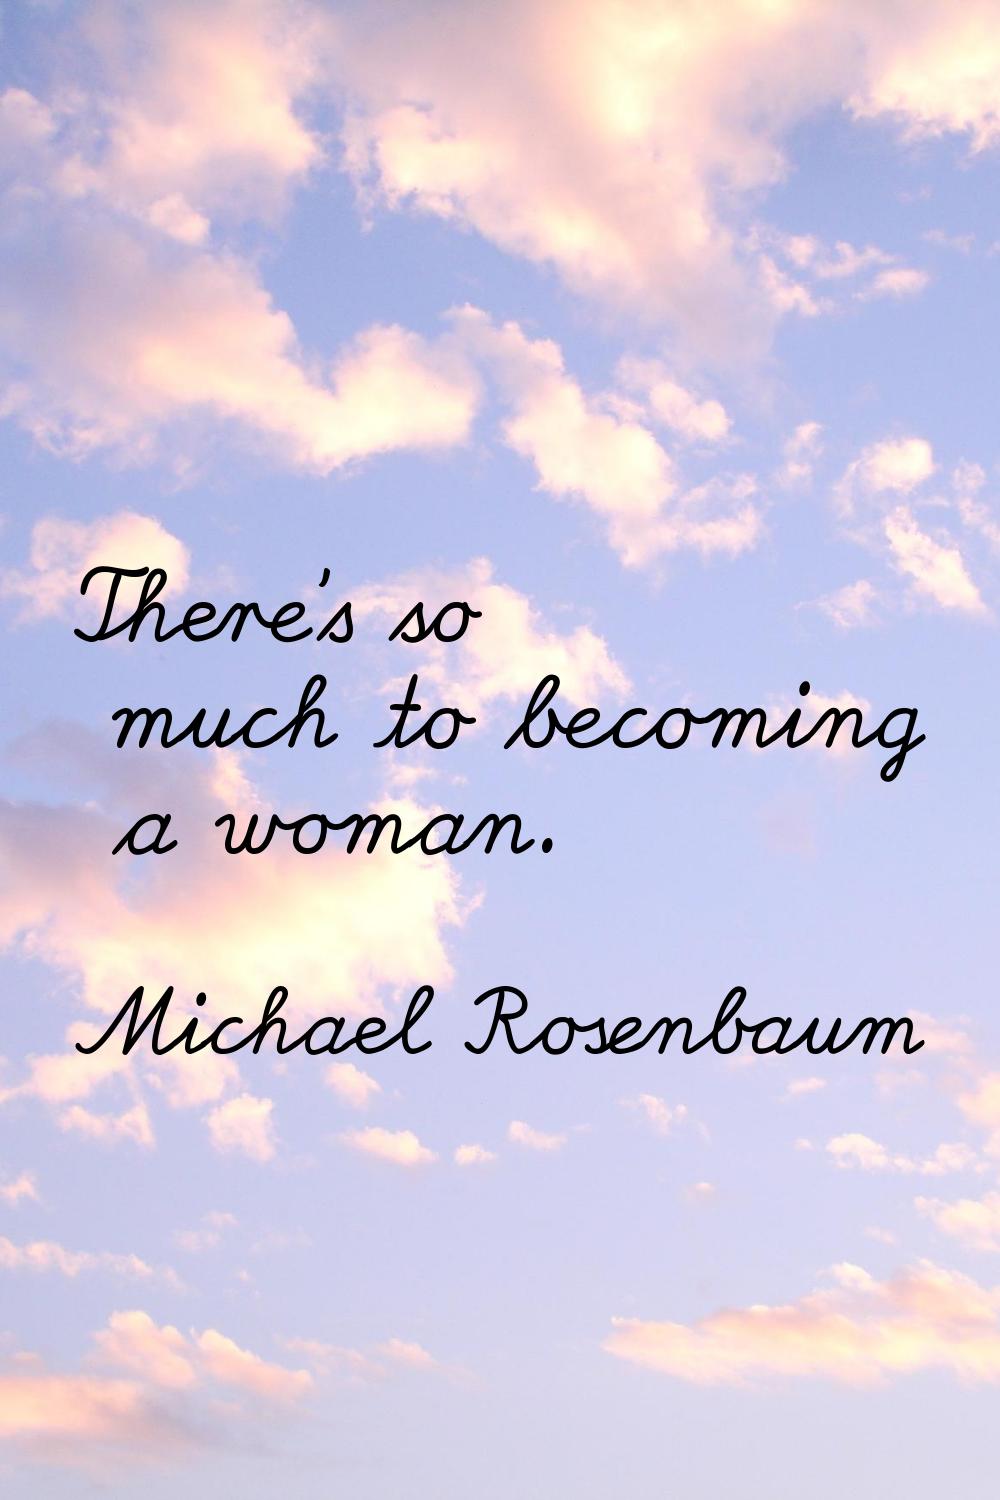 There's so much to becoming a woman.